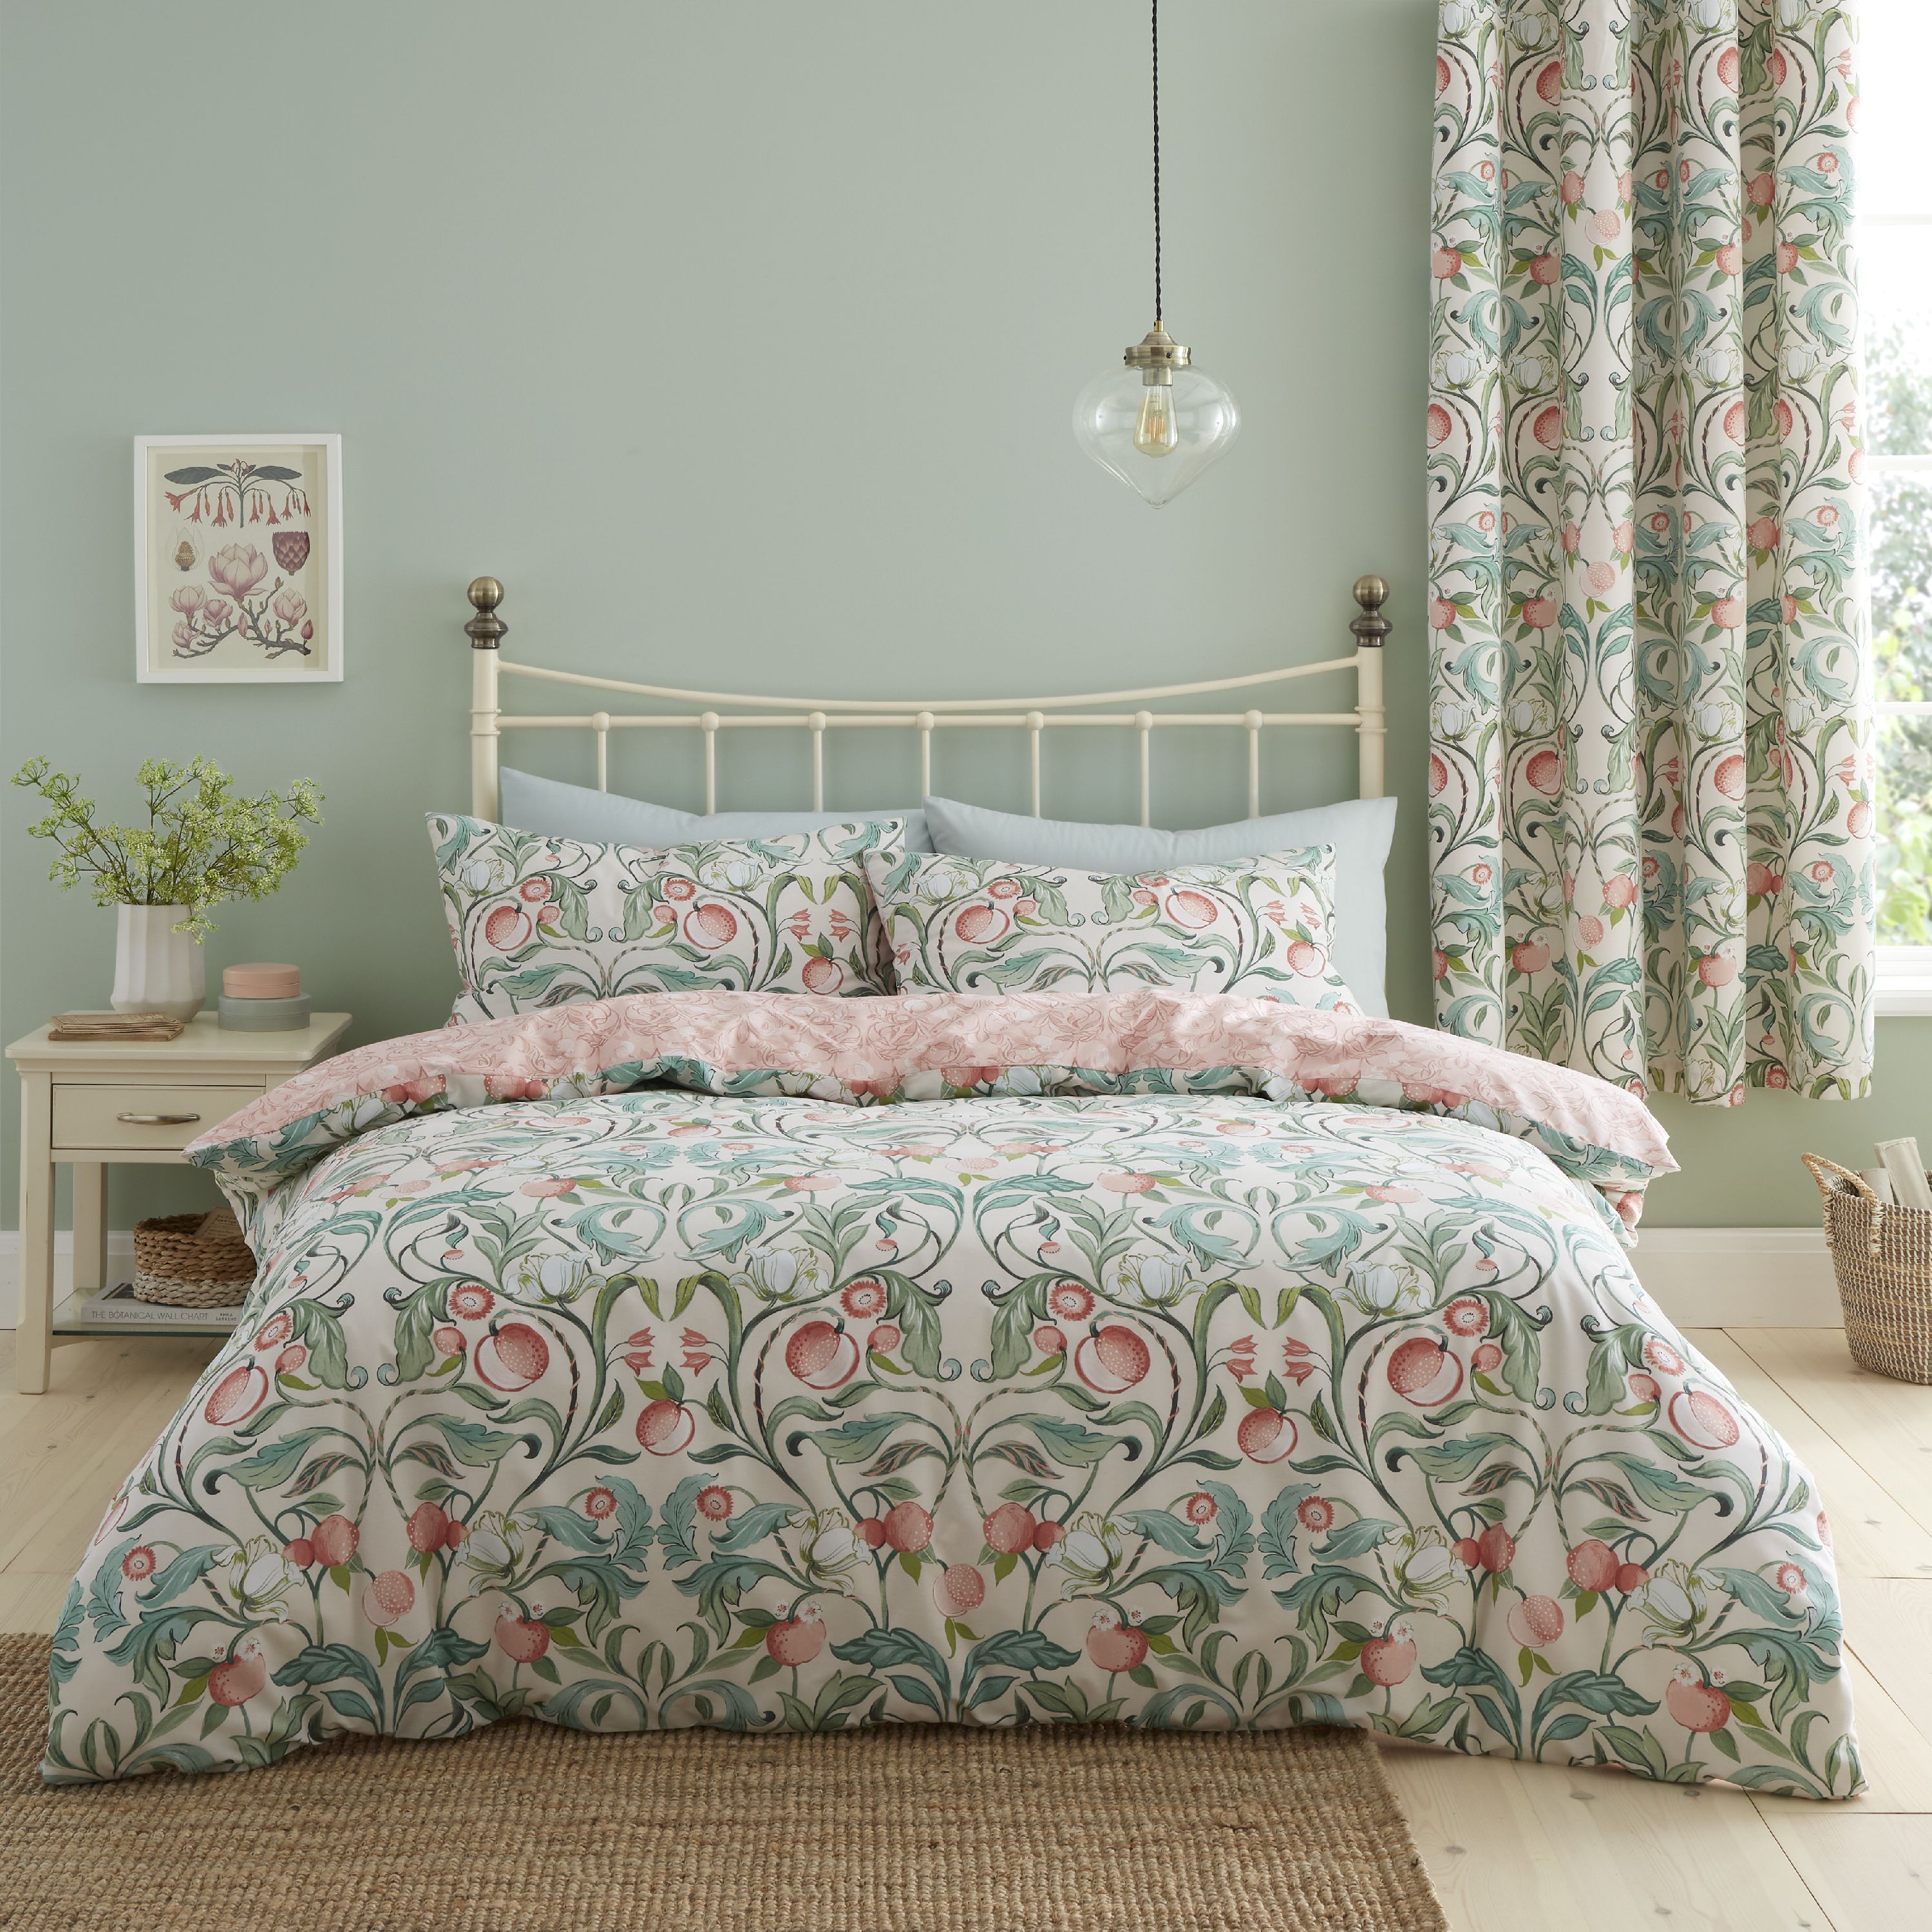 Catherine Lansfield Tufted Print Geo Natural Duvet Cover and Pillowcase Set